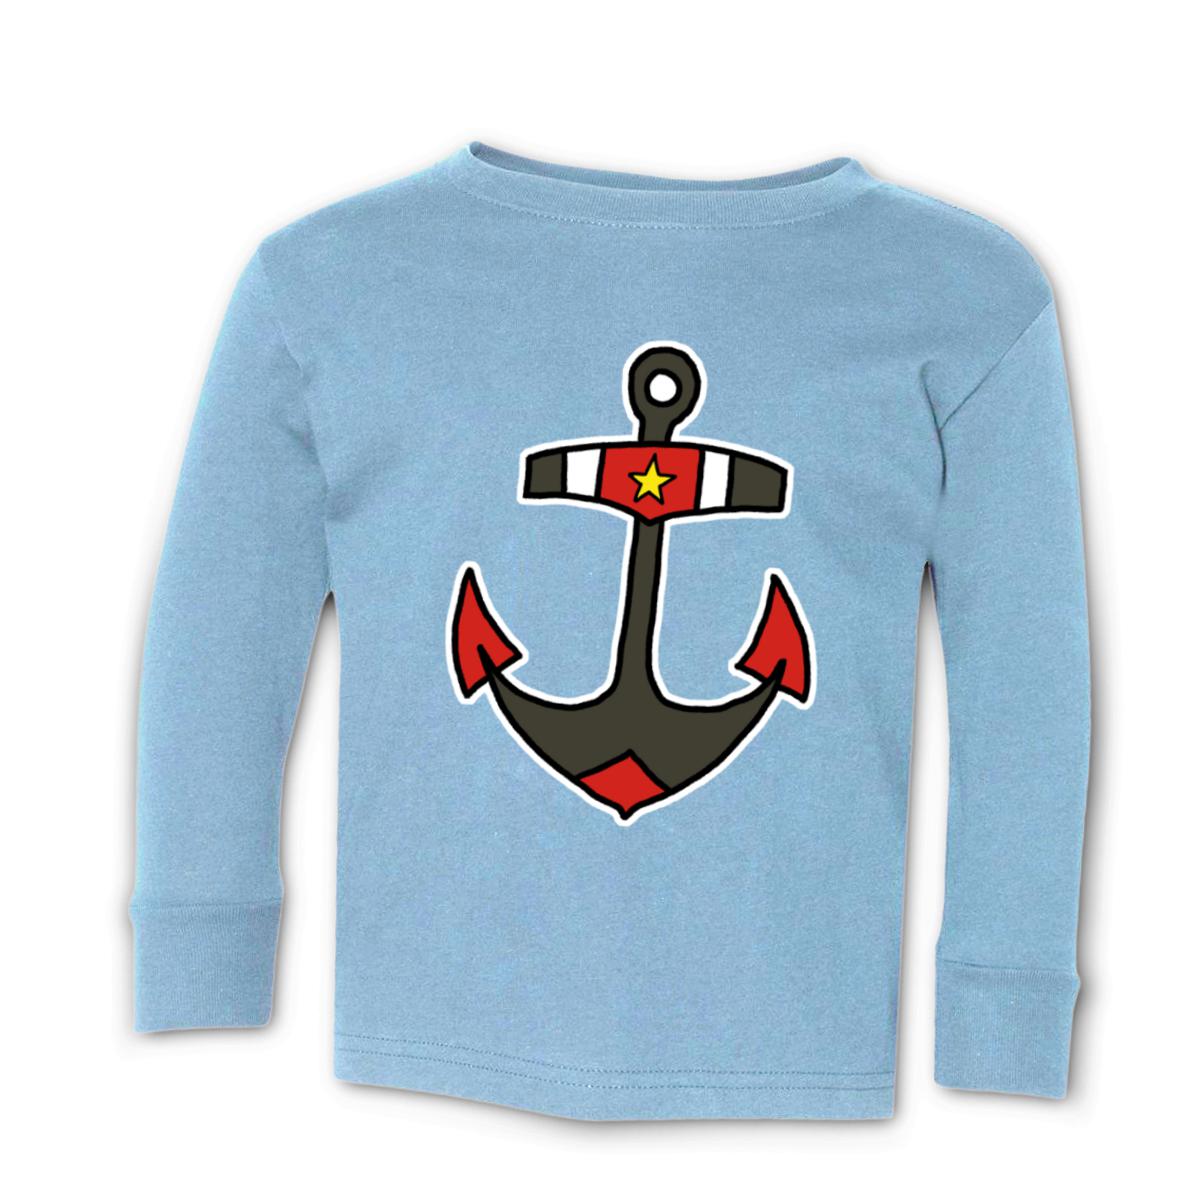 American Traditional Anchor Toddler Long Sleeve Tee 56T light-blue